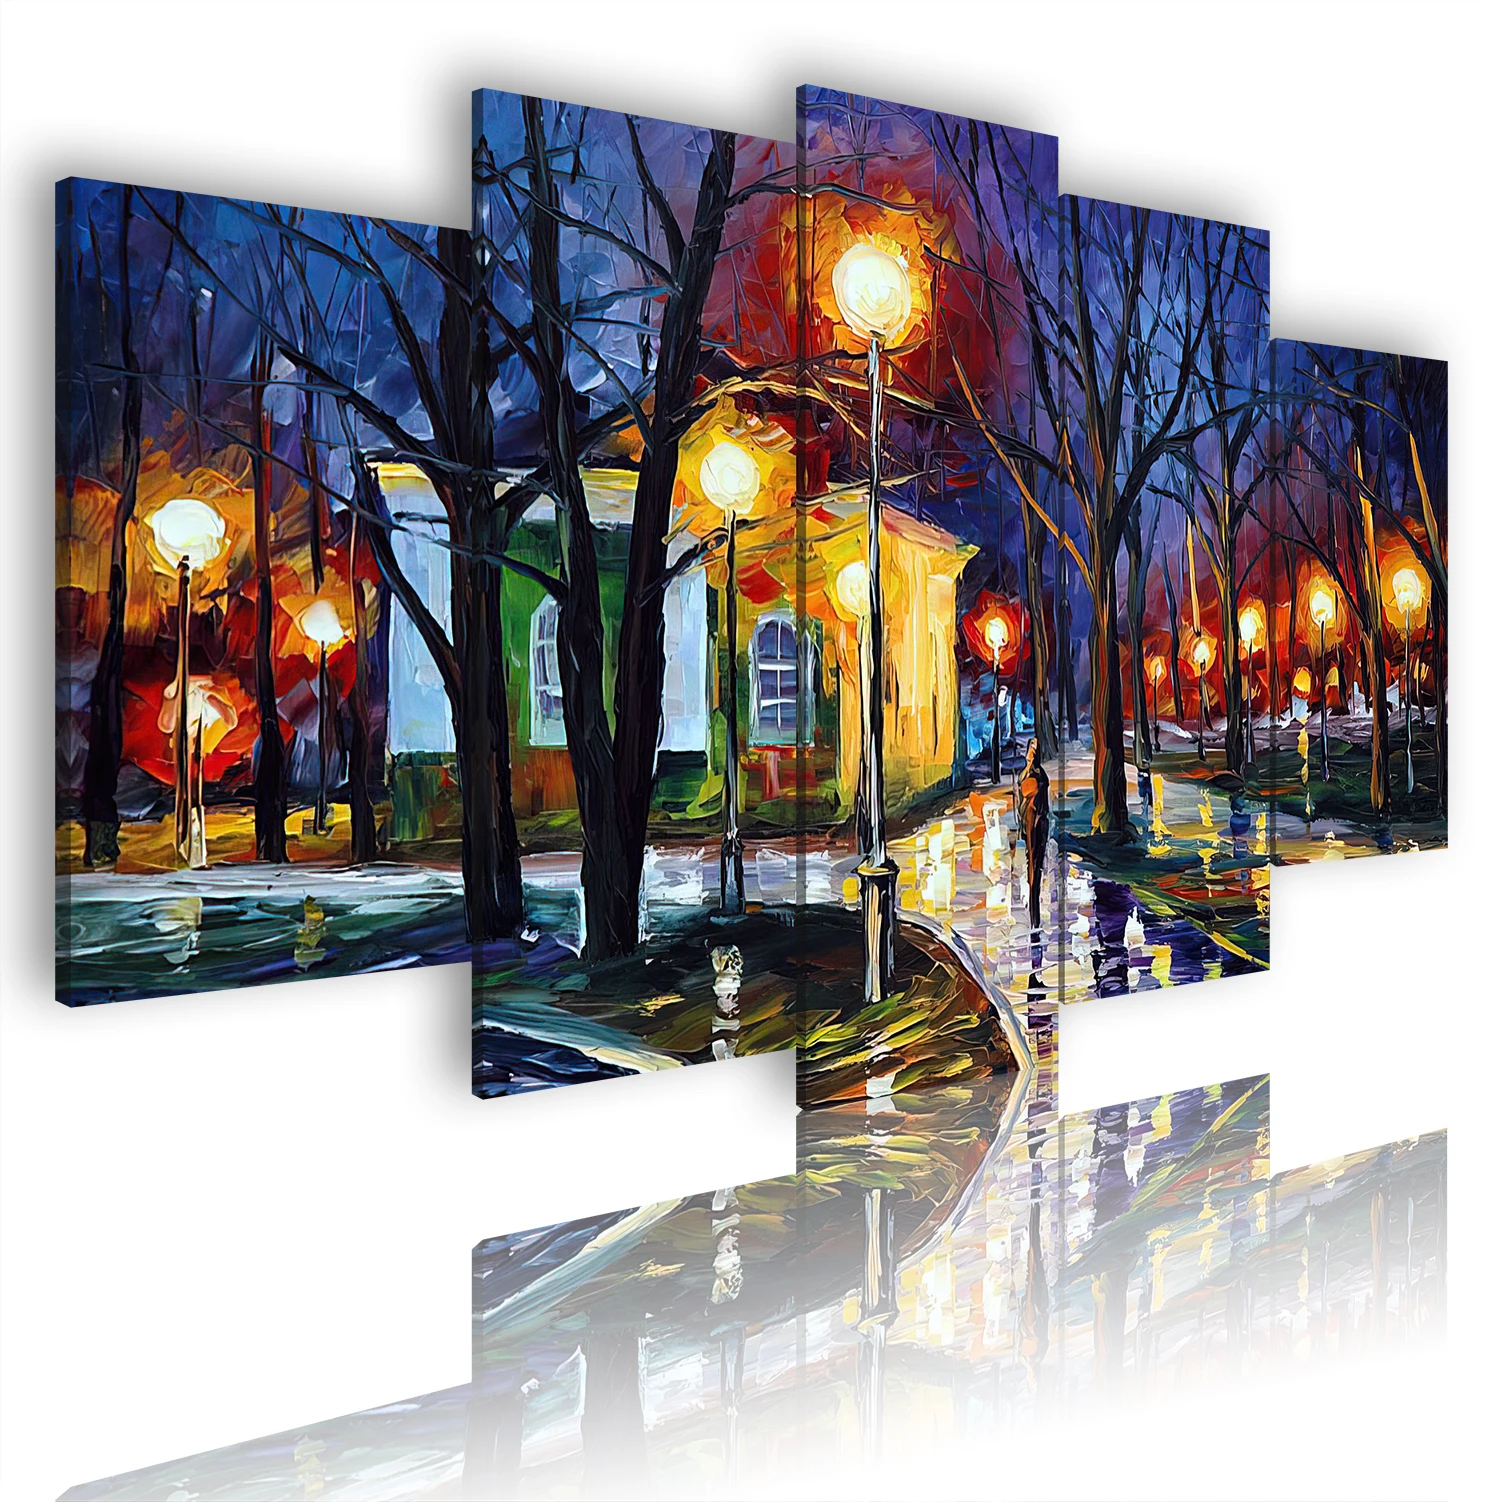 

Painting Oil Picture Canvas Print Living Room Decoration Decor 3D Beautiful Scenery Seven 5 Panel Wall Art